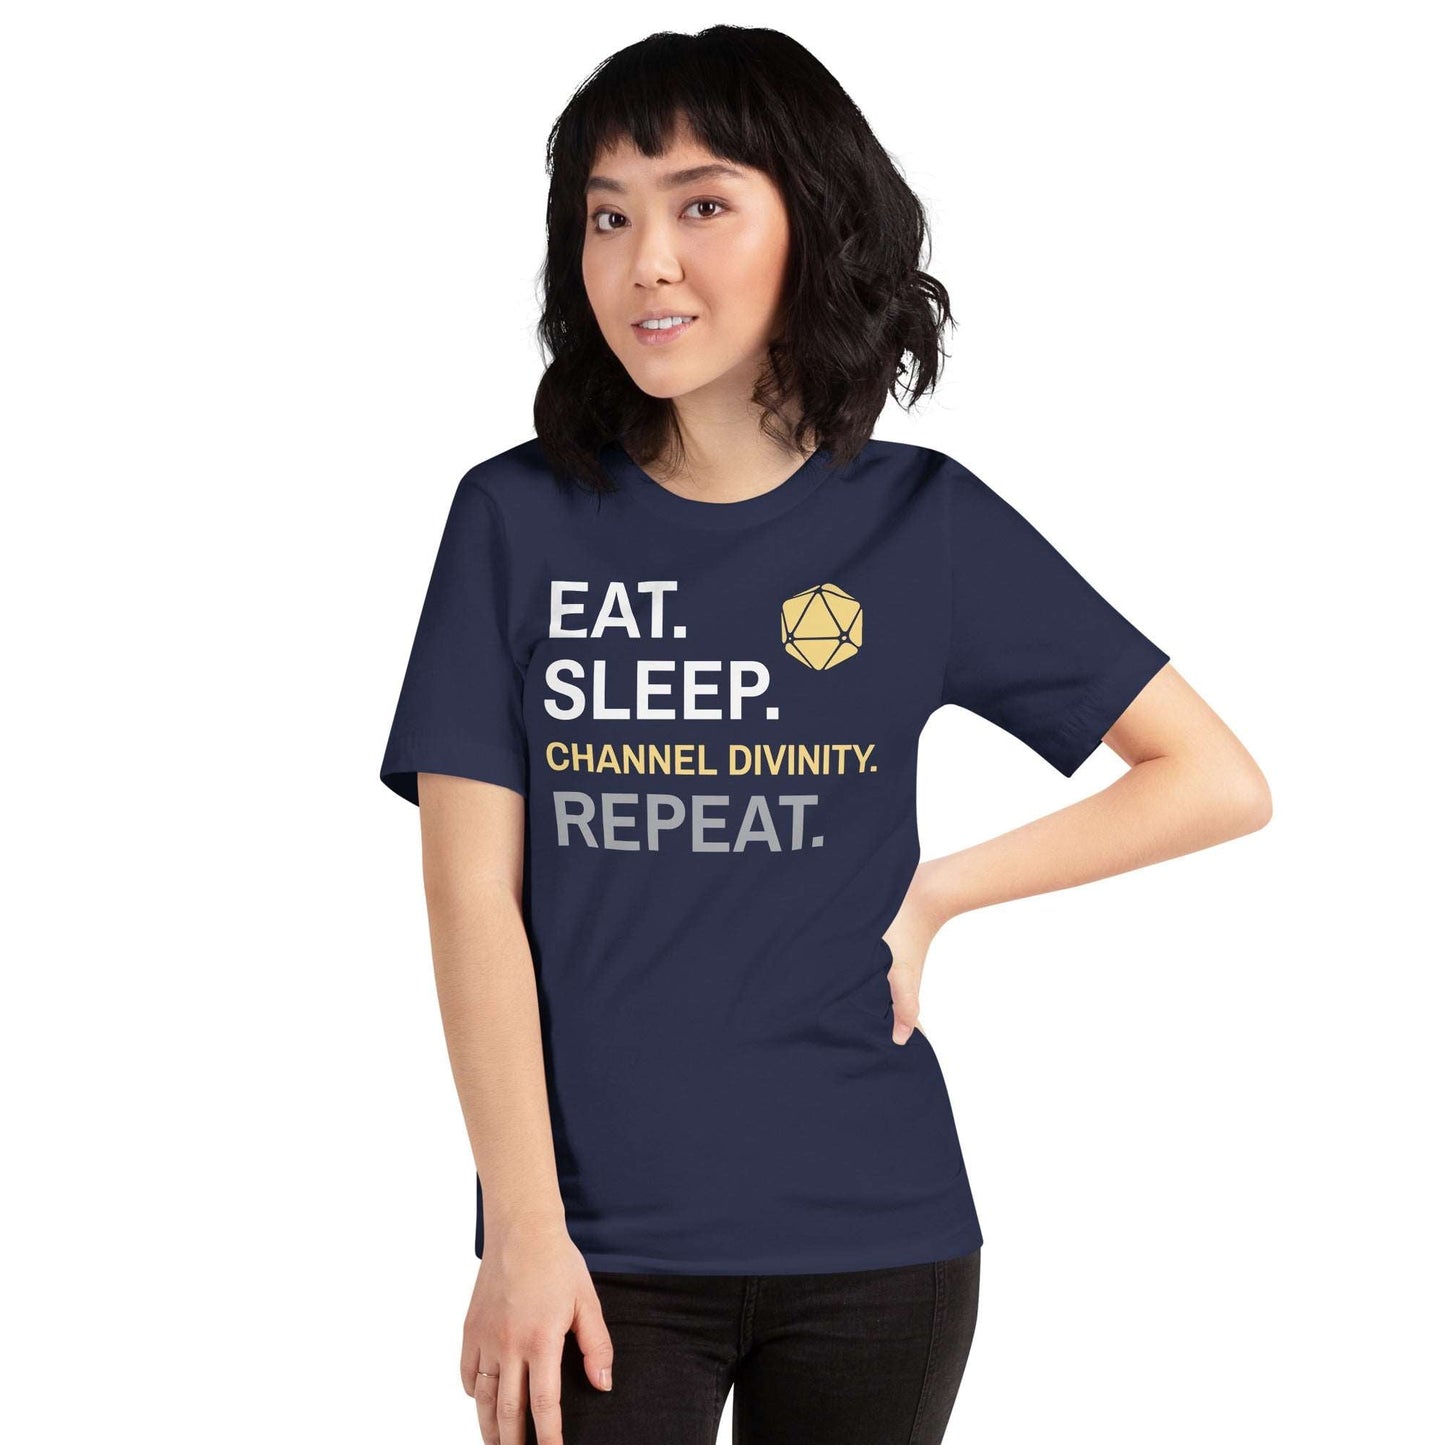 Cleric Class T-Shirt – 'Eat, Sleep, Channel Divinity, Repeat' – Dungeons & Dragons Cleric Class Apparel T-Shirt